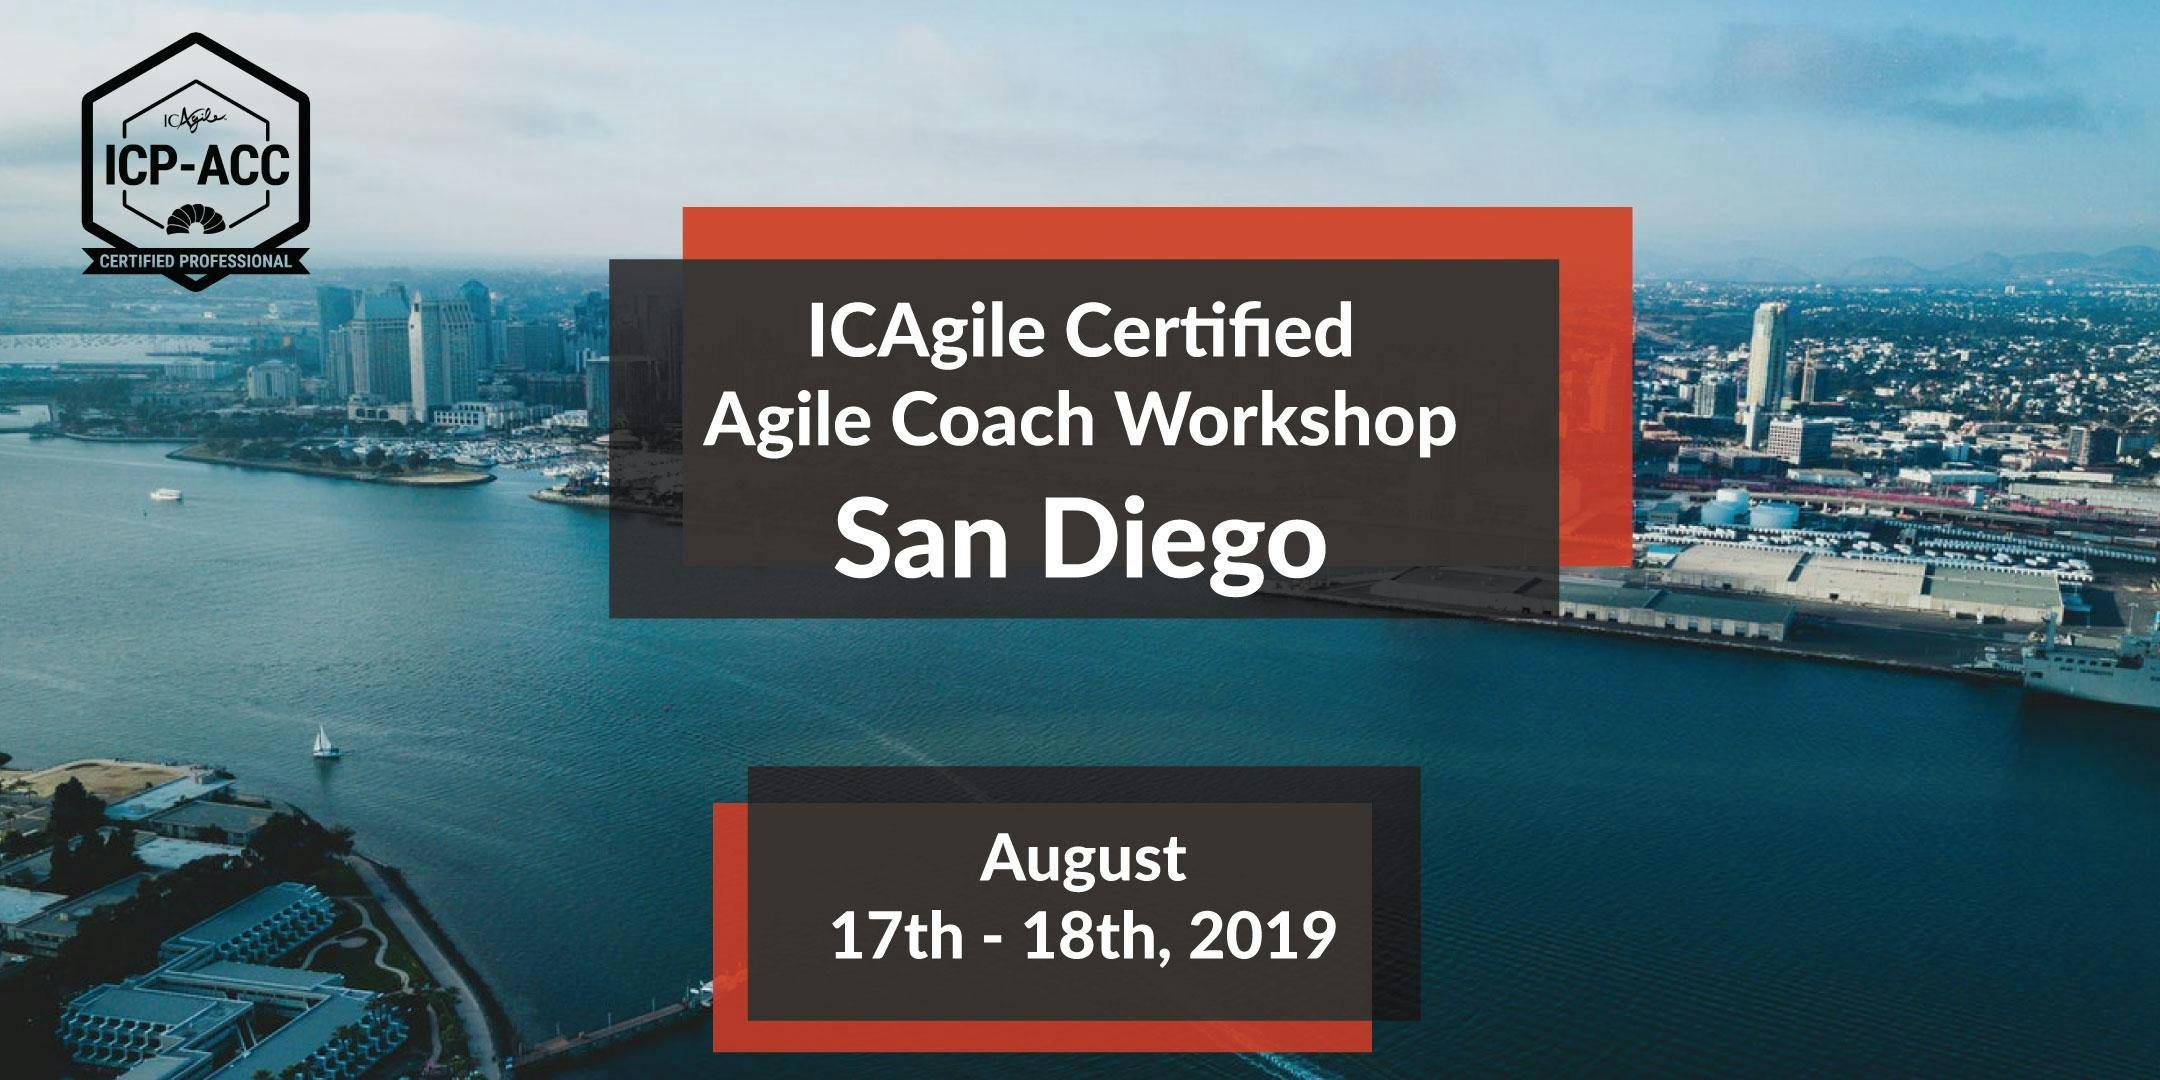 Agile Coach Workshop with ICP-ACC Certification - San Diego - Aug